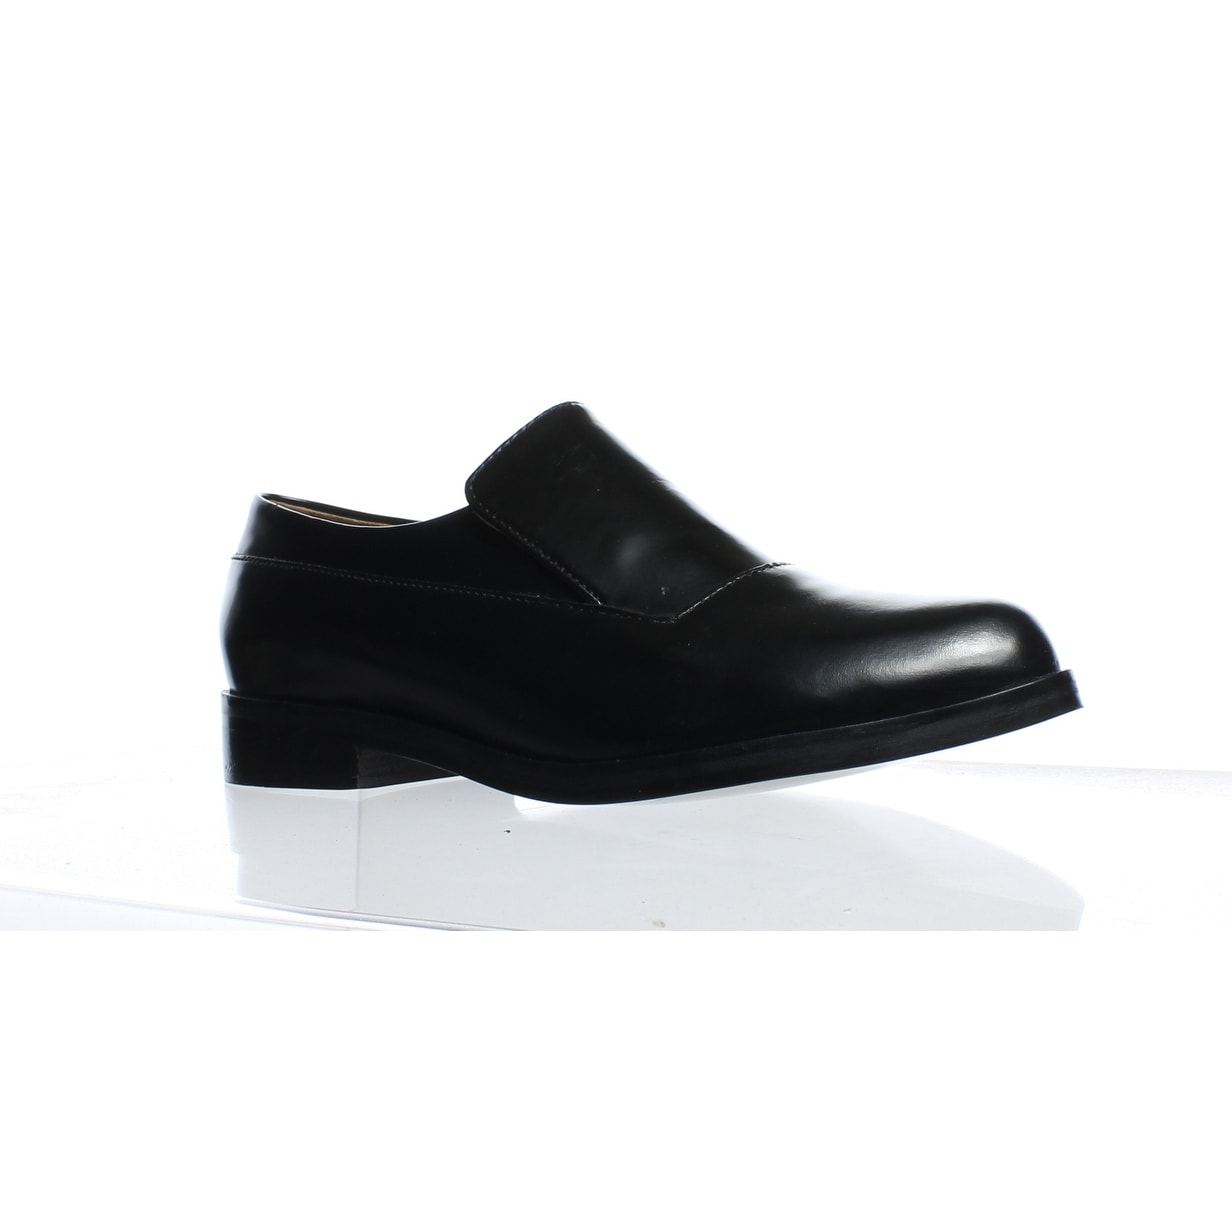 seychelles loafers